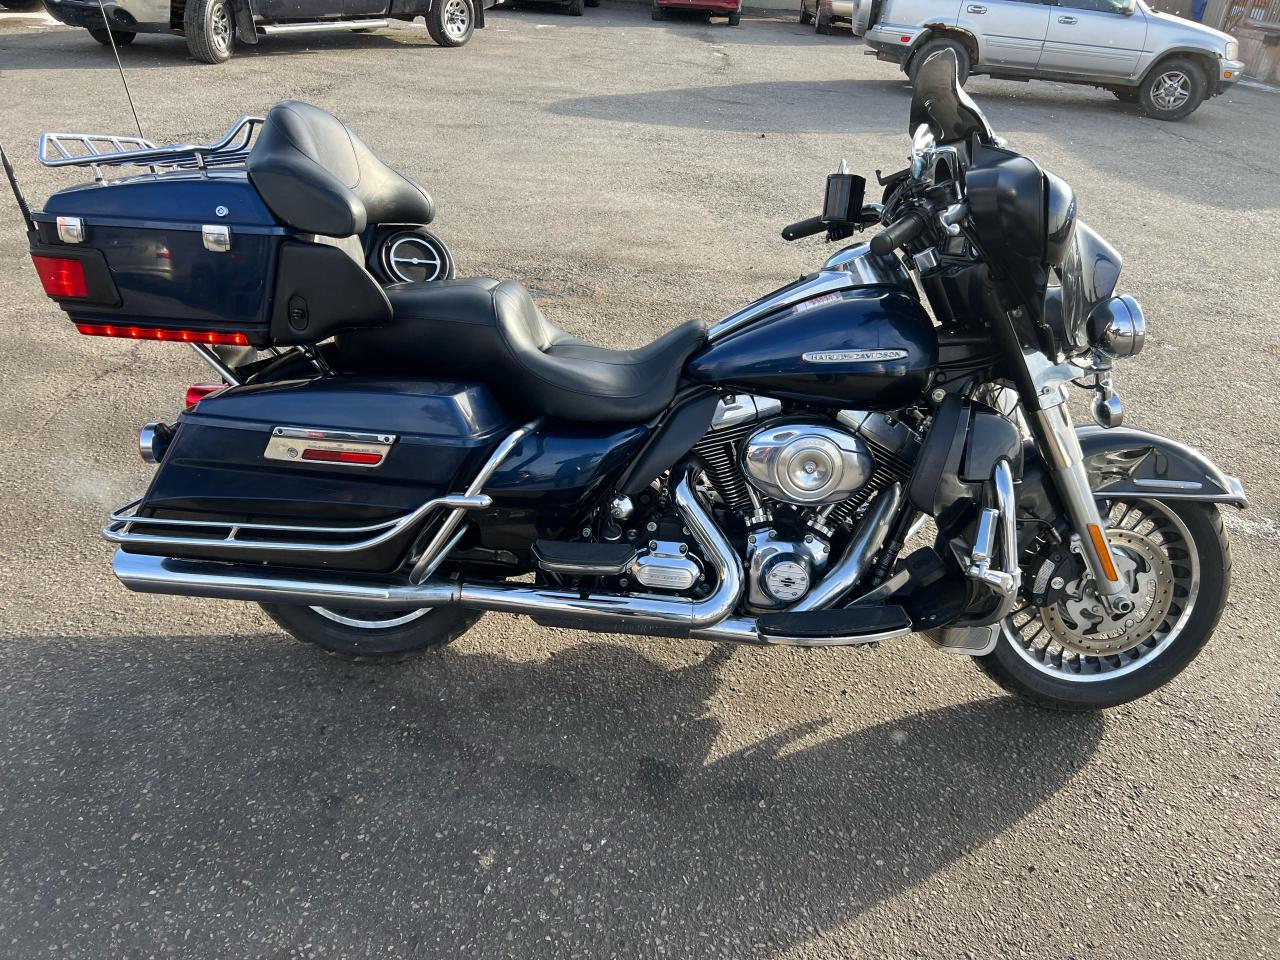 2013 Harley-Davidson FLHTK Electra Glide Ultra Limited LIMITED**ELECTRA**VANCE N HINES**RUNS GREAT**AS IS - Photo #6